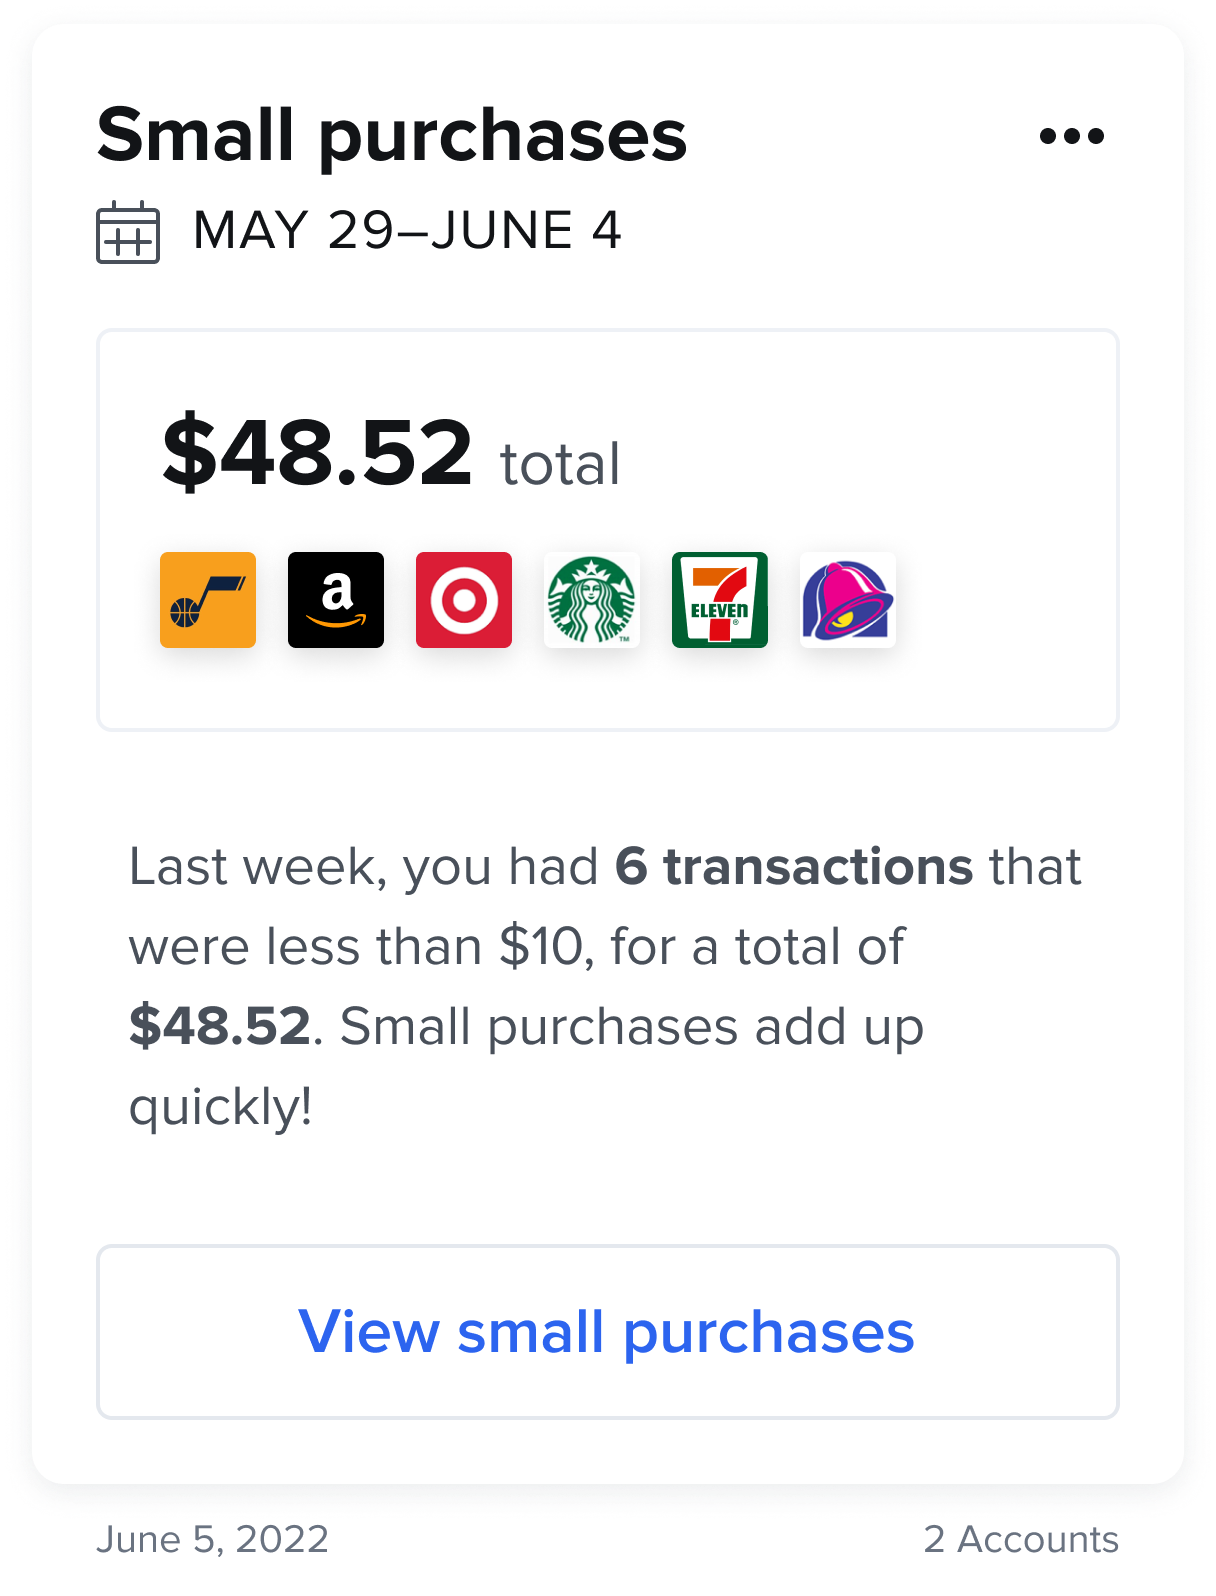 weekly_small_purchases_summary.png